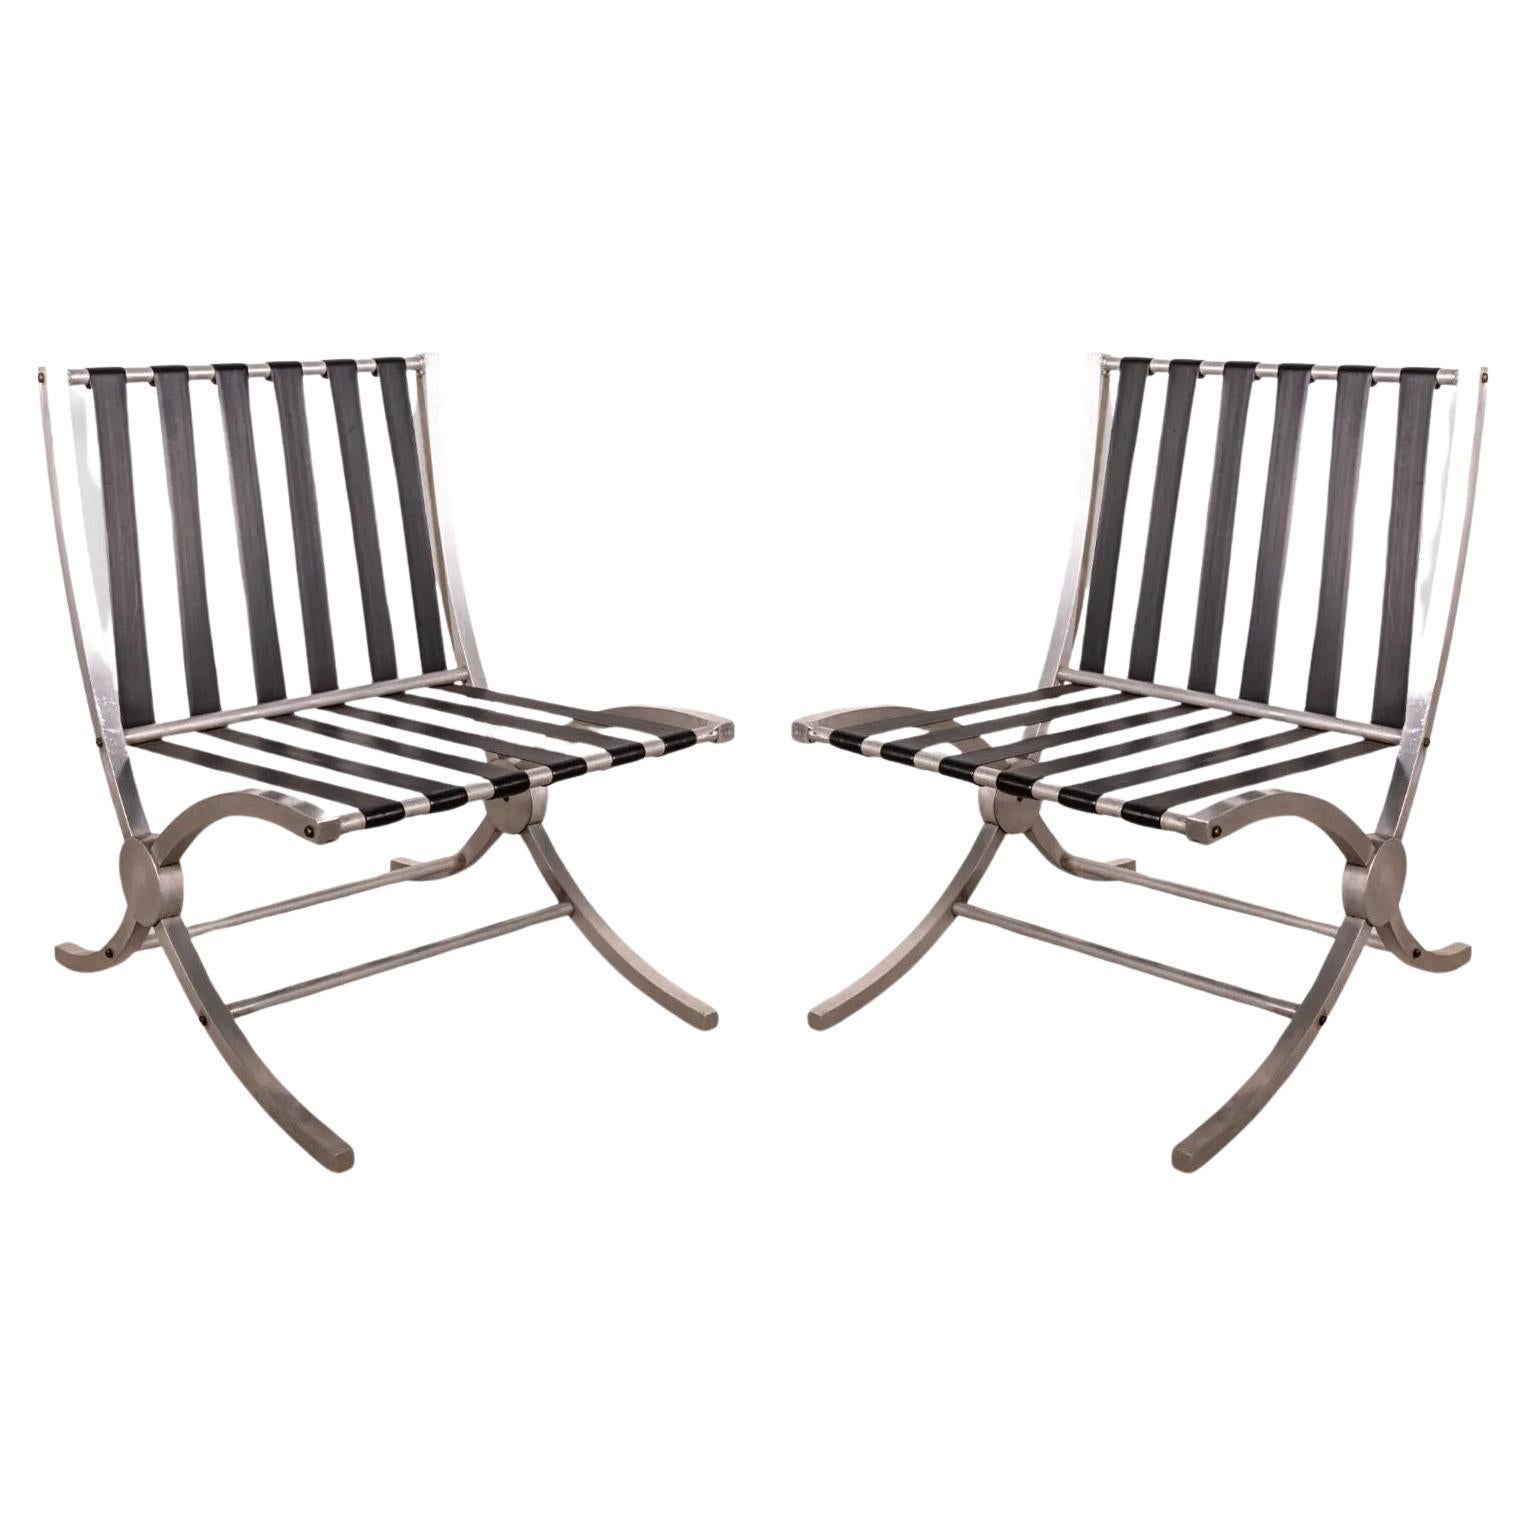 Pair of Art Deco Aluminum and Black Barcelona Style X Framed Sleek Lounge Chairs